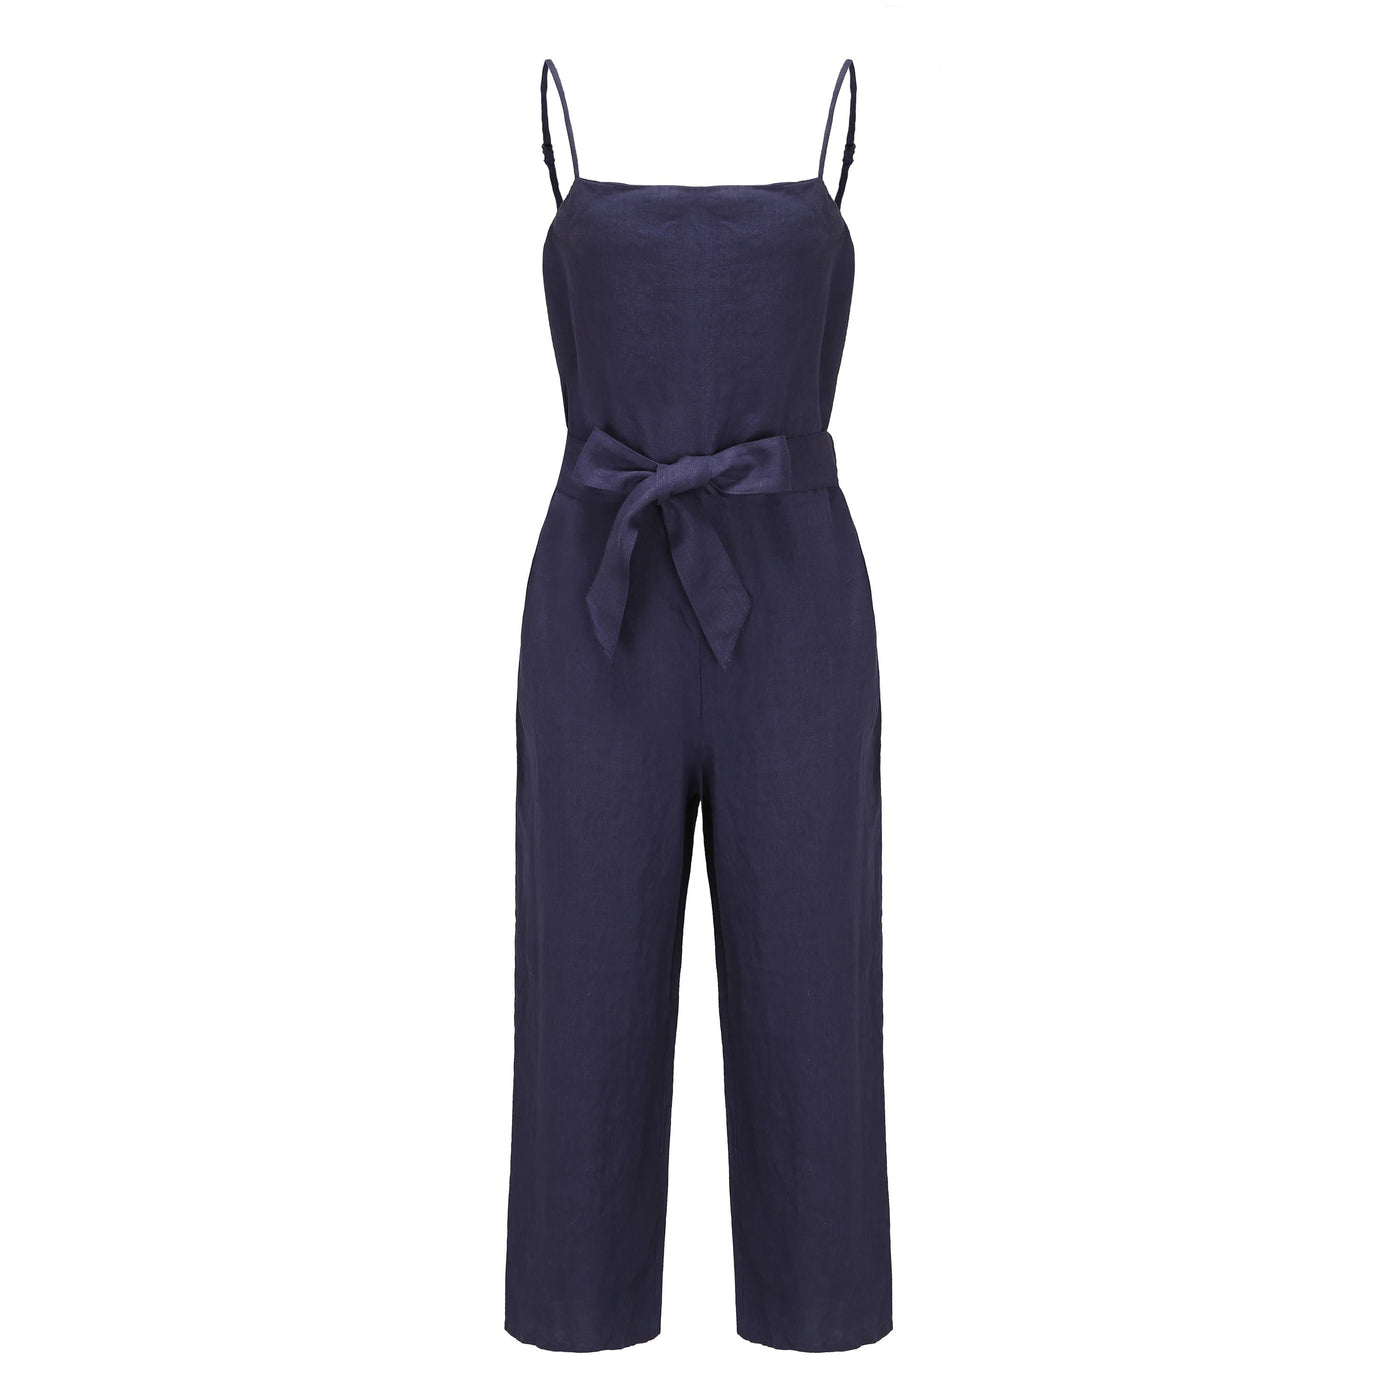 Lilly Pilly Collection 100% organic linen Chloe Jumpsuit in Denim Blue as 3D image showing front view